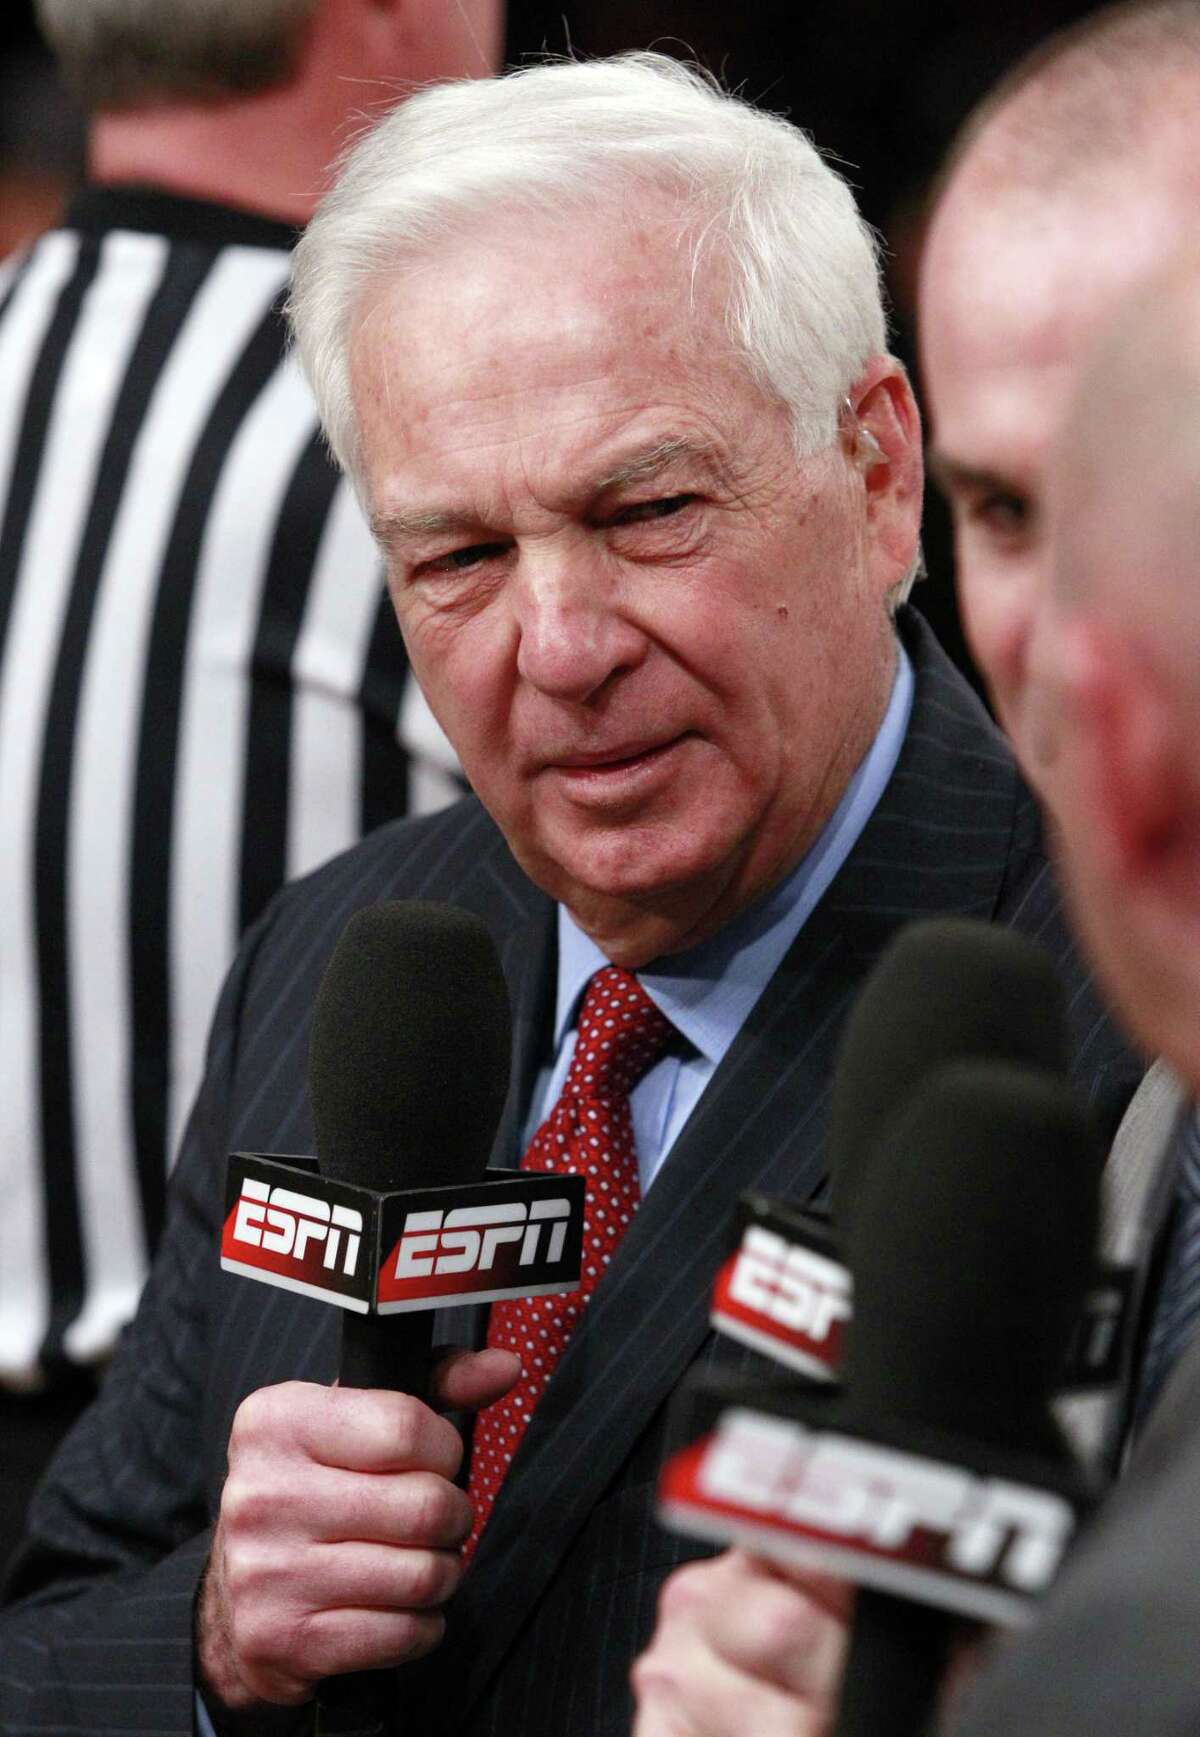 Bill Raftery and Grant Hill will call the Final Four this season, taking the place of the suspended Greg Anthony to work alongside play-by-play announcer Jim Nantz, CBS and Turner Sports said Tuesday.